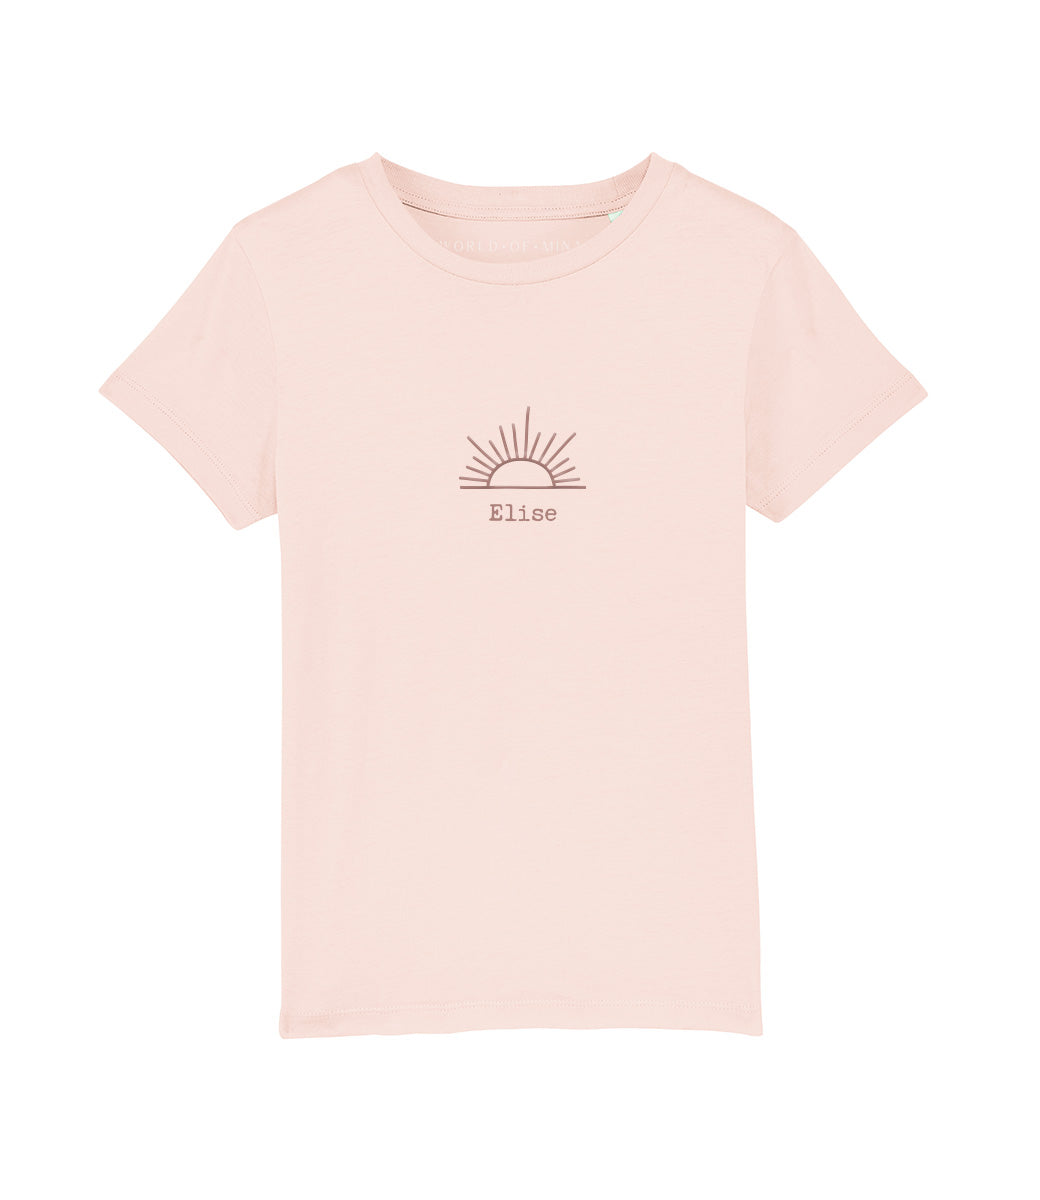 Kids t-shirt // Sunrise - embroidered with name